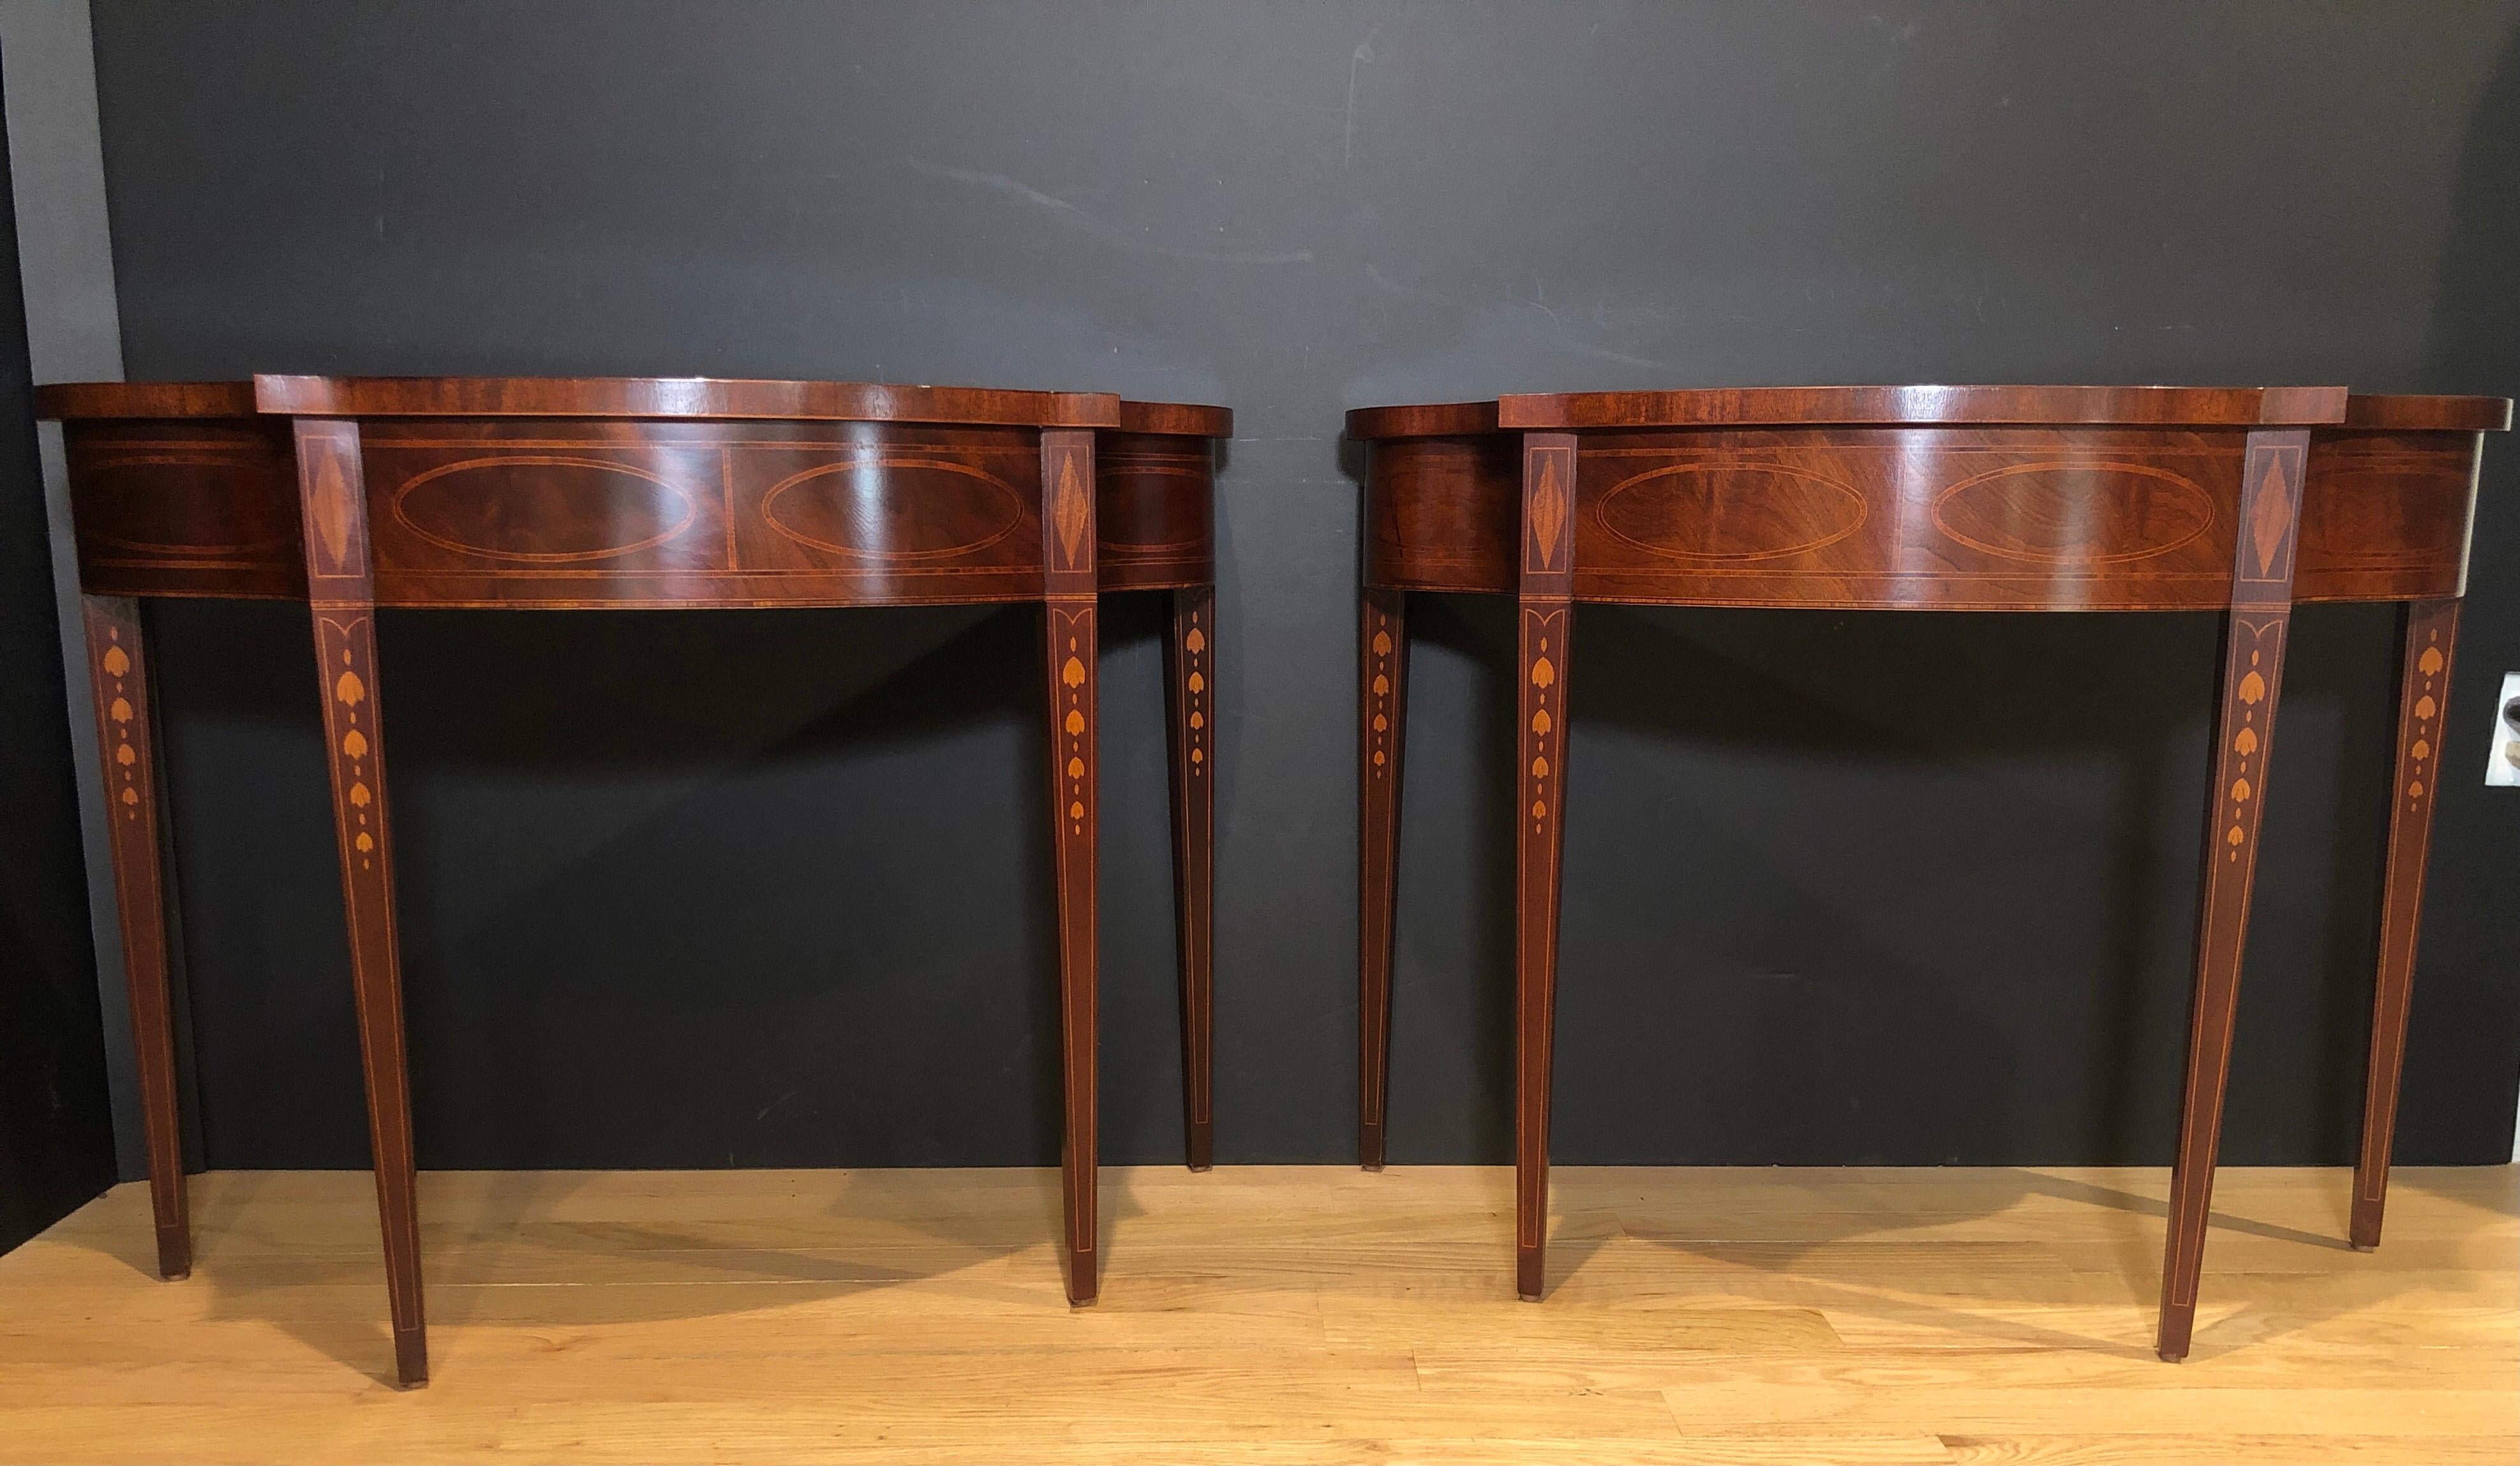 Pair of historic Charleston demilune console tables by Baker. Beautiful serpentine sides. Inlaid on sides and legs.